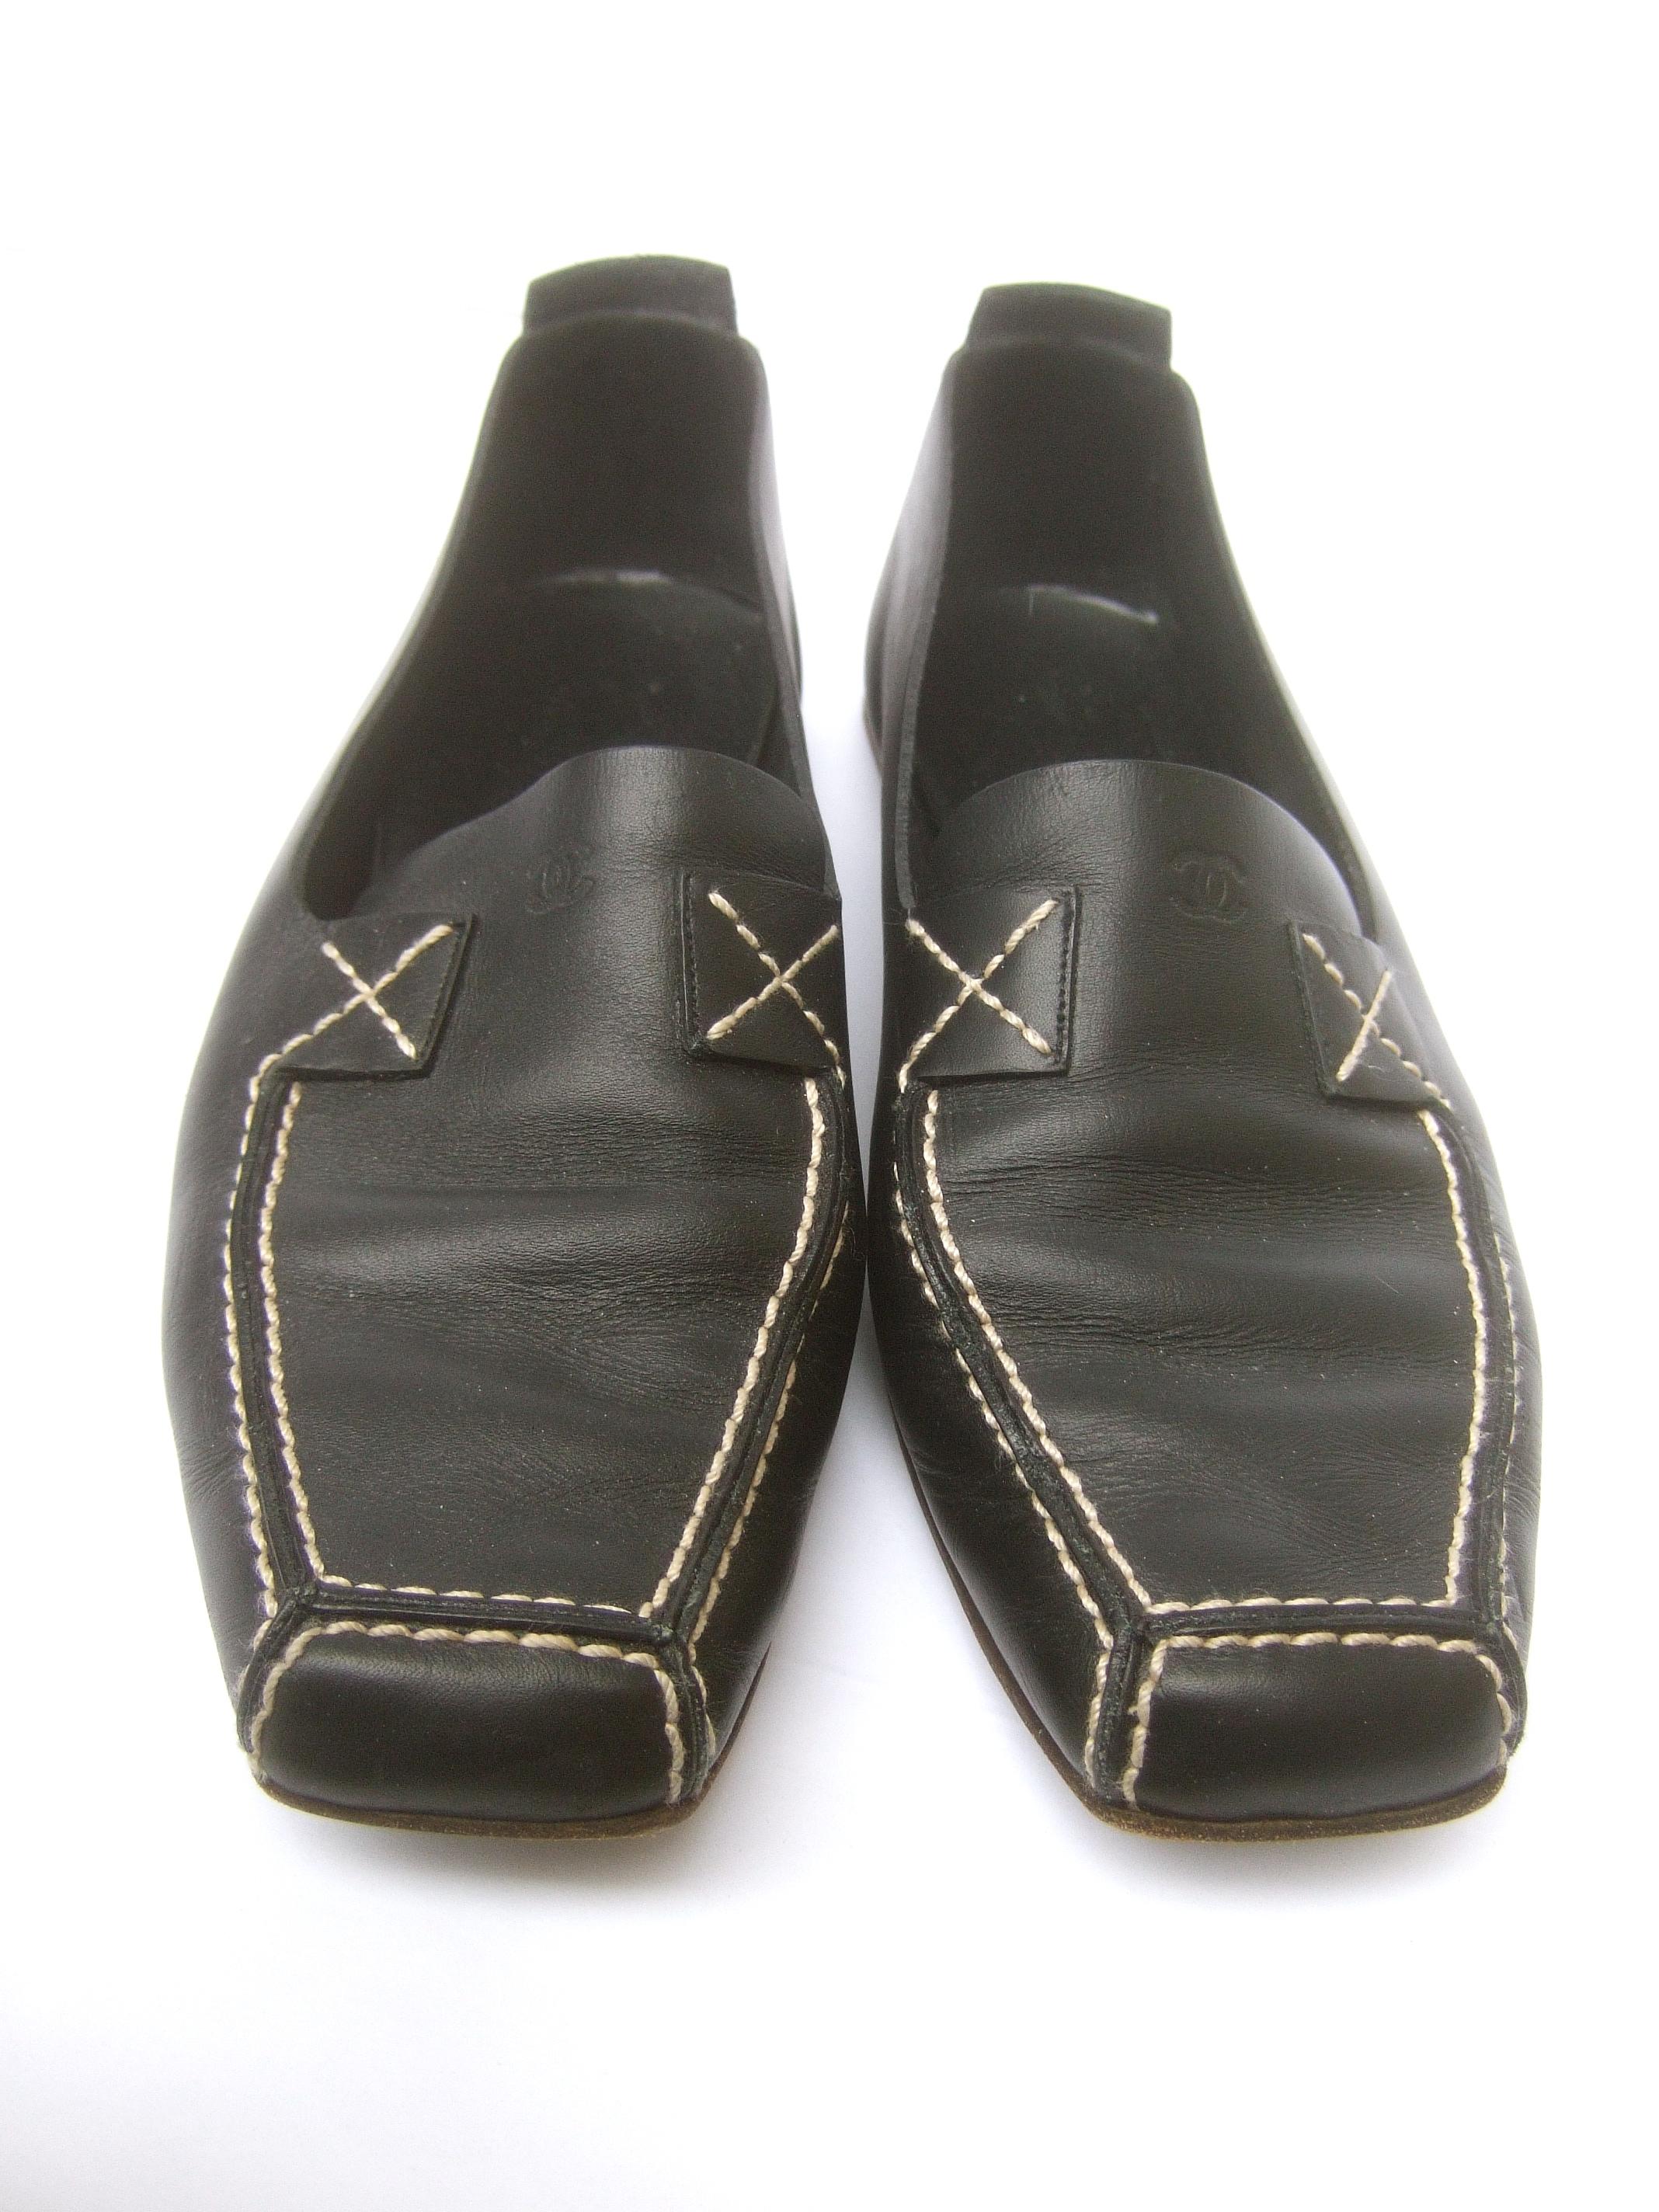 Chanel black leather slip-on Italian low heel flats Size 38.5 c 1990s
The stylish Italian flats are constructed with smooth black matte leather
designed with a square-shaped toe. Accented with white saddle stitching 

The back exterior heel is